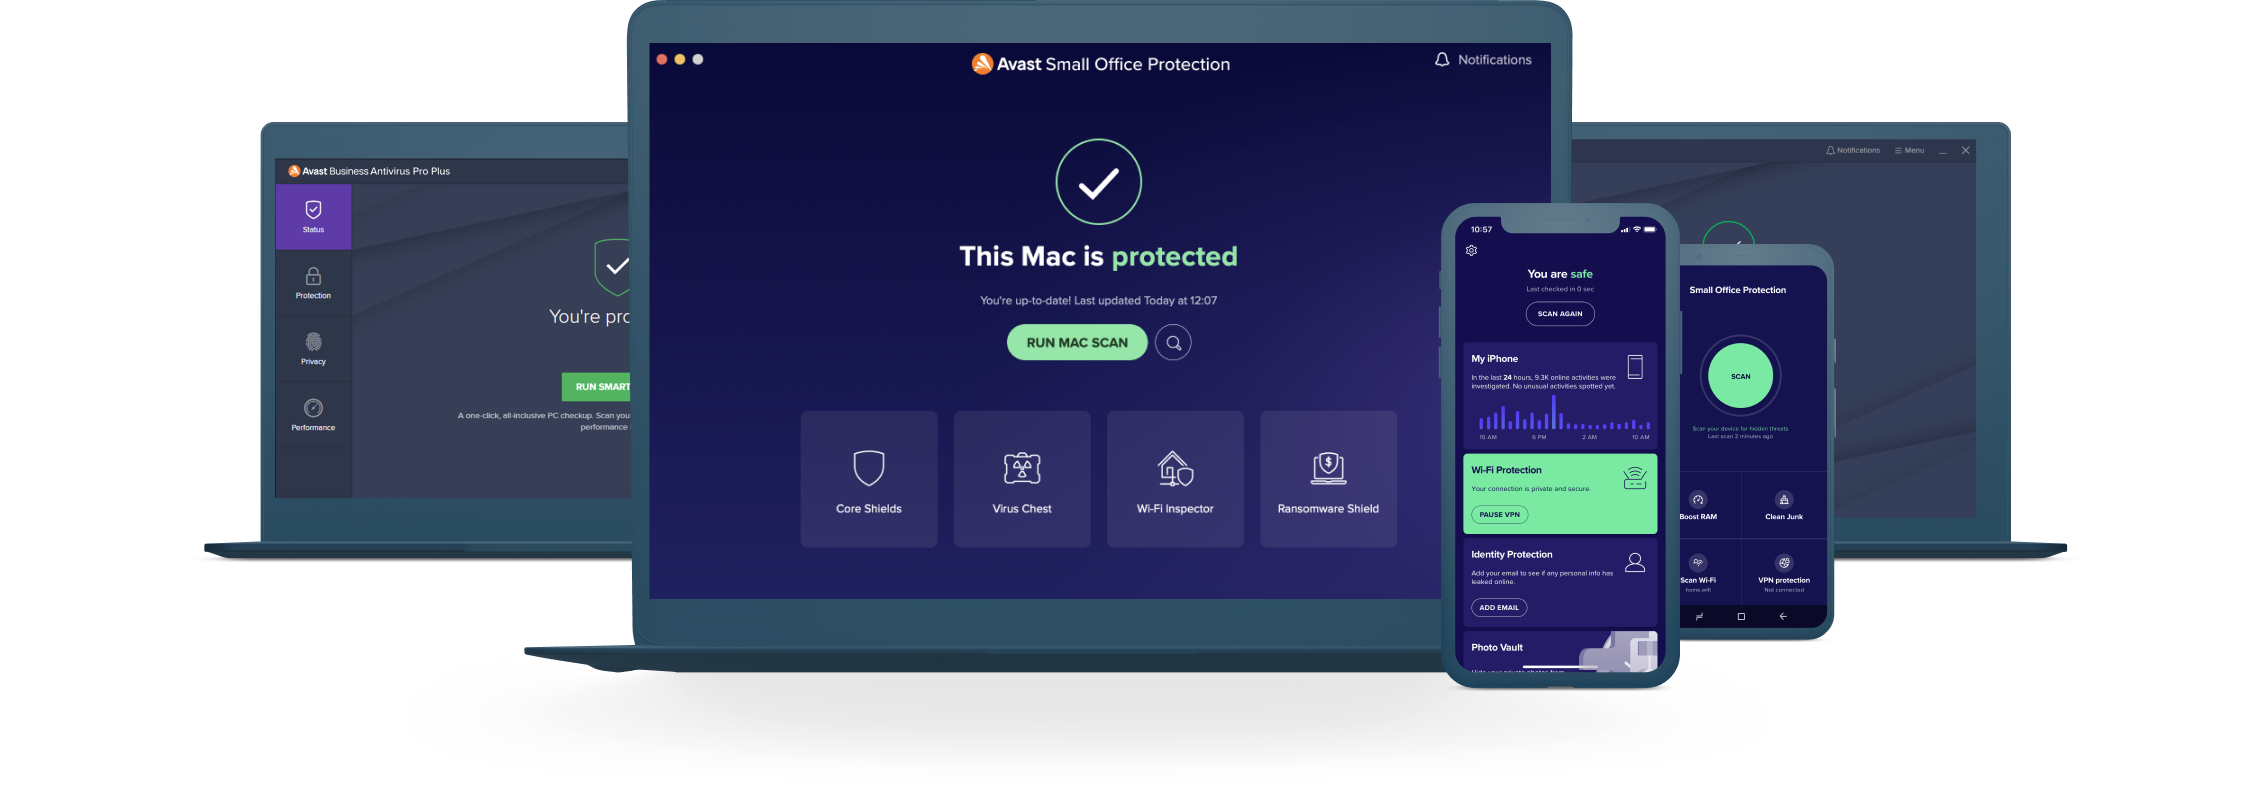 Avast Small Office Protection Software - 1